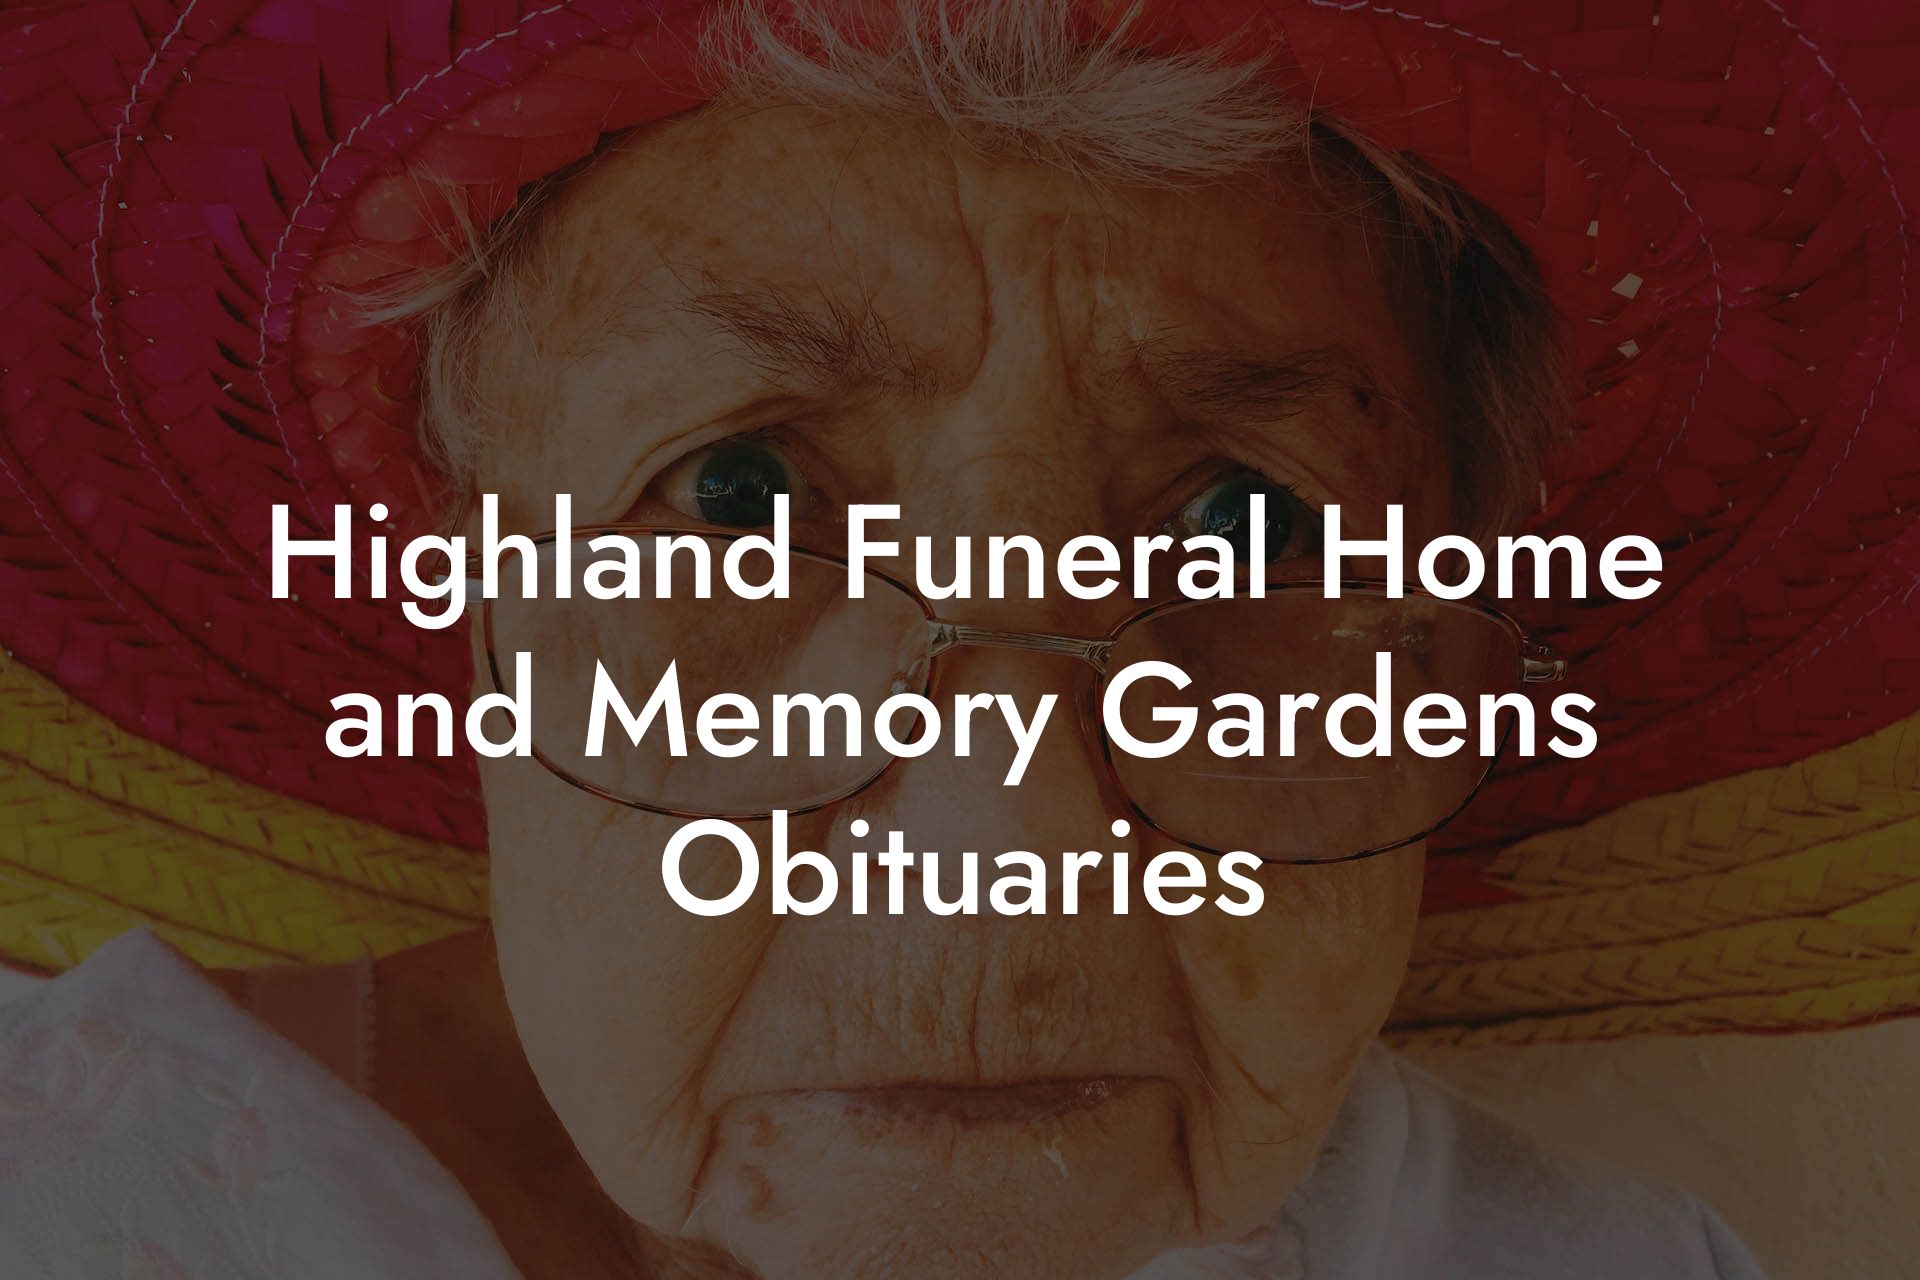 Highland Funeral Home and Memory Gardens Obituaries